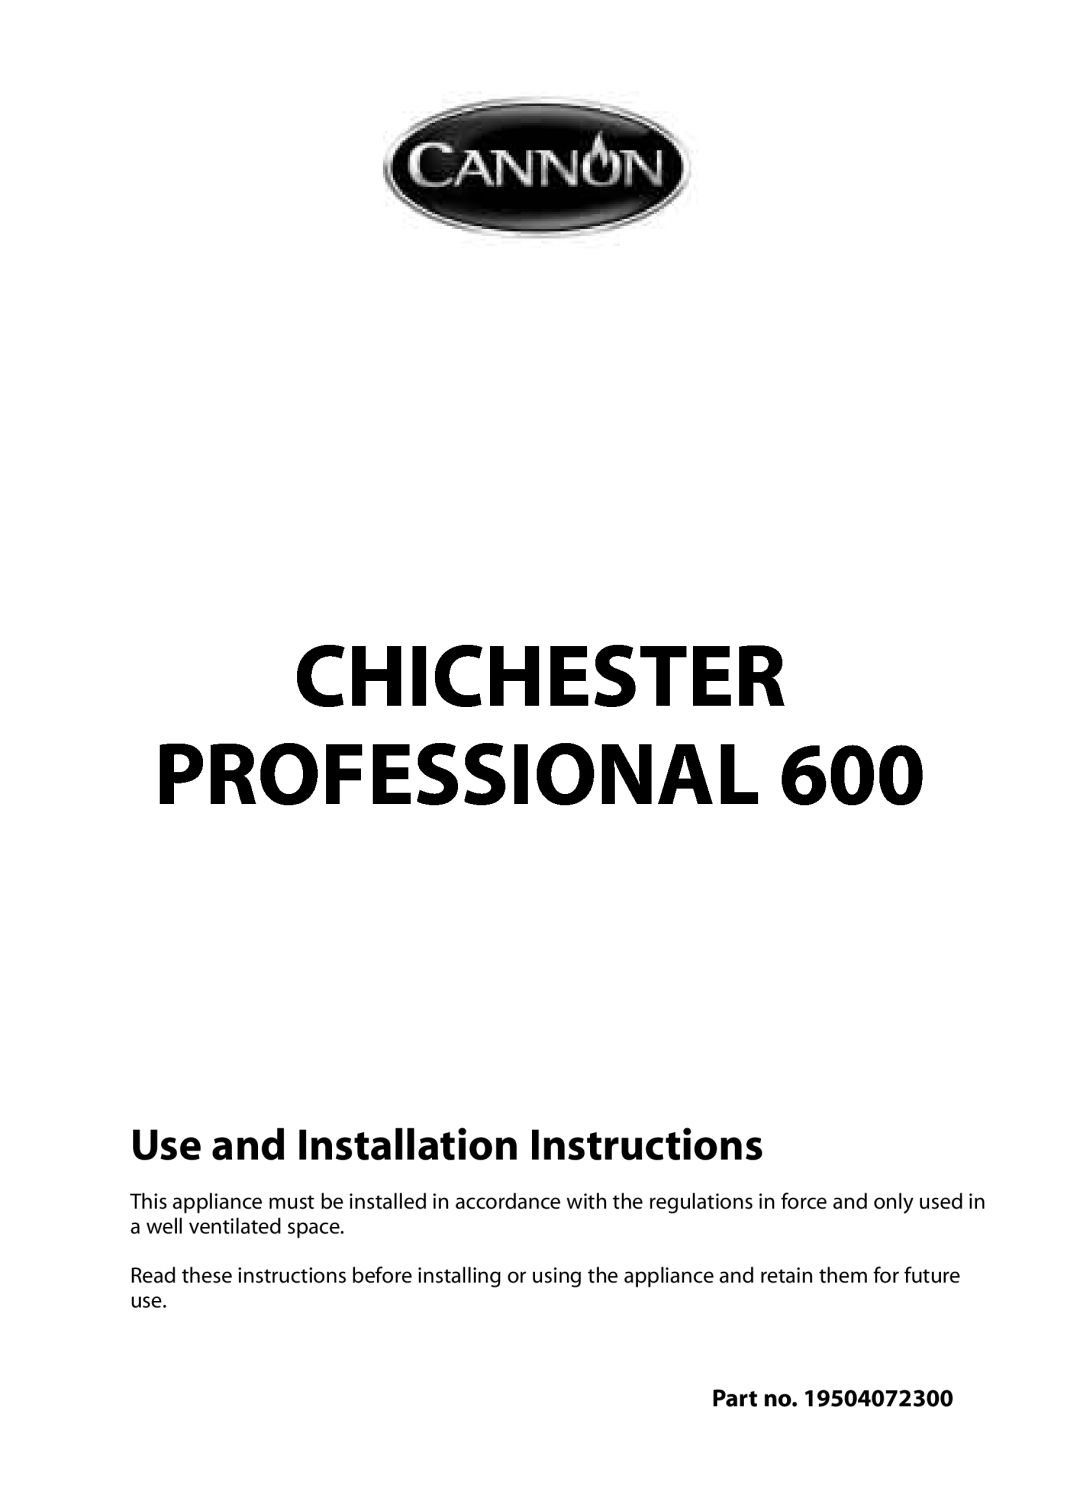 Cannon 10574G, 10573G, 10578G, 10572G installation instructions Use and Installation Instructions, Chichester Professional 